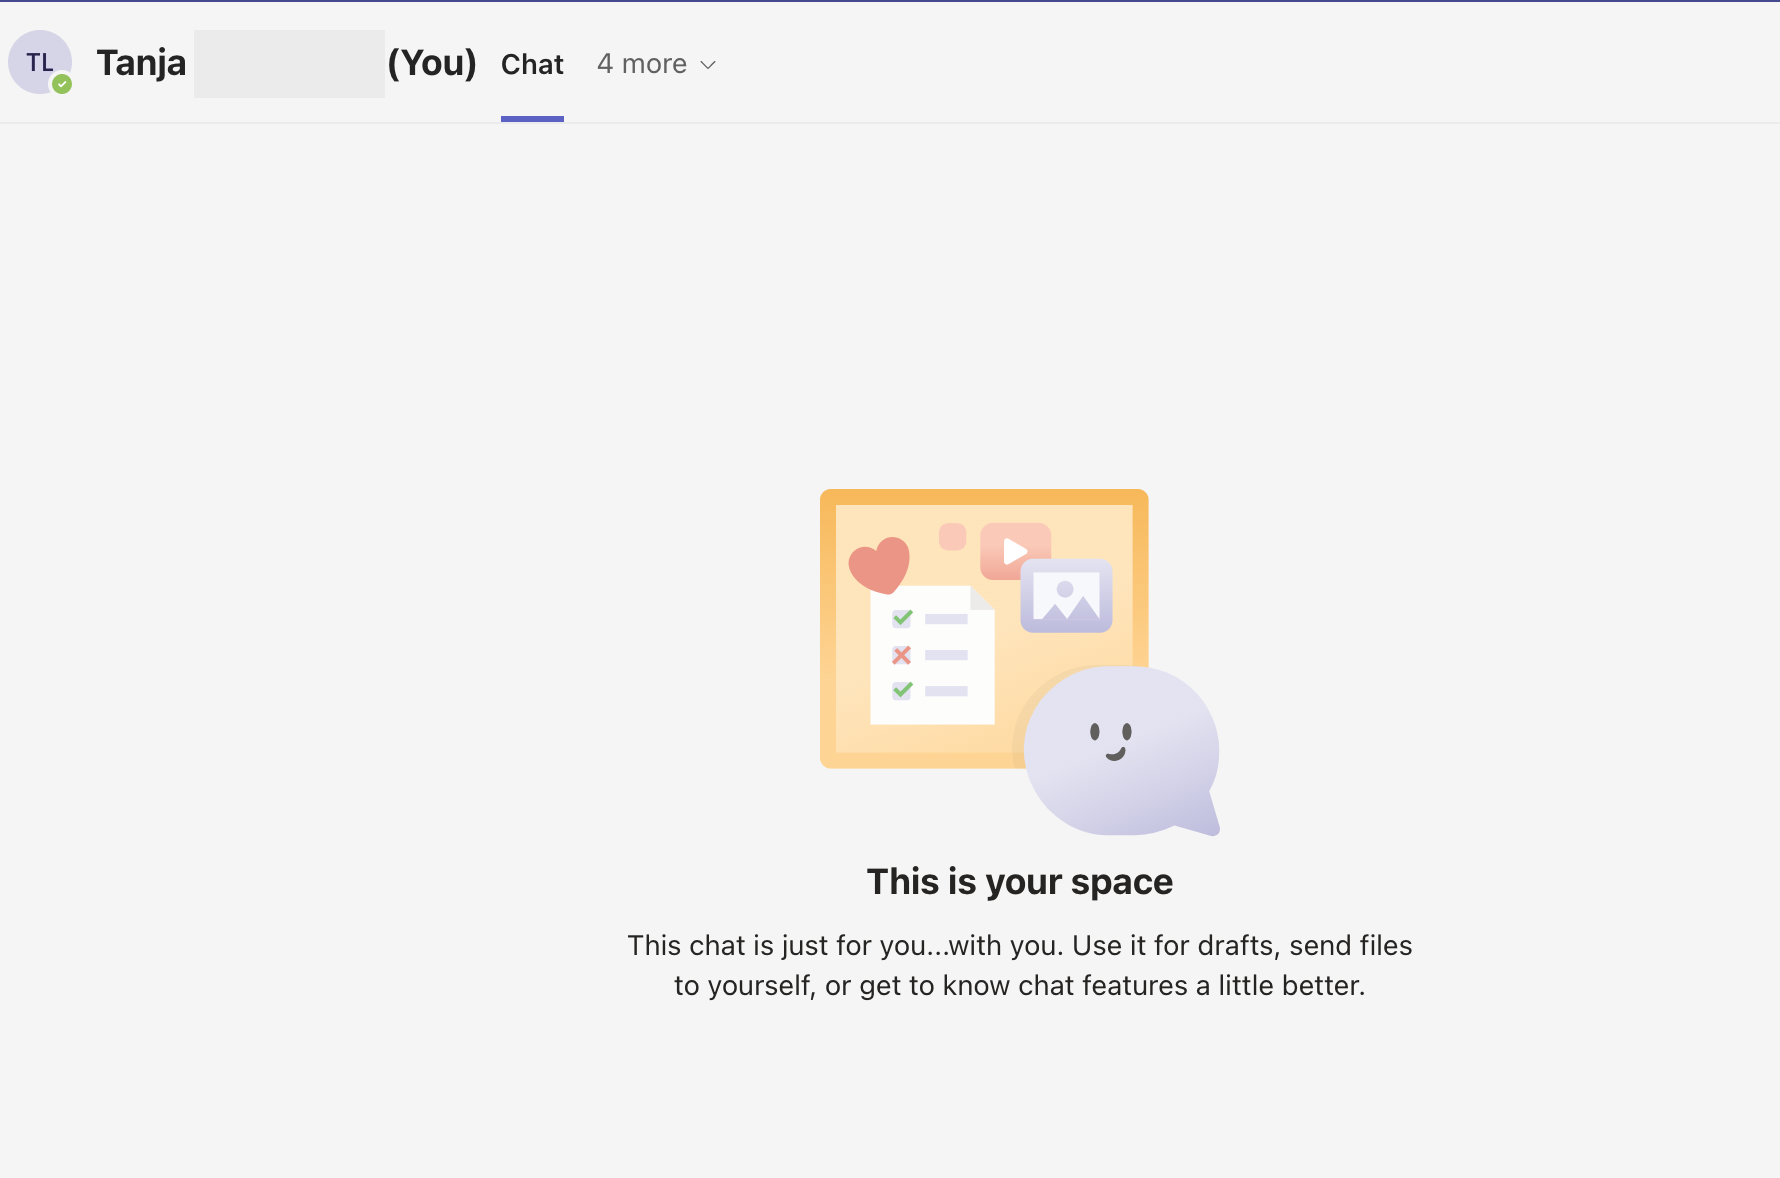 Chat with Self feature in Microsoft Teams